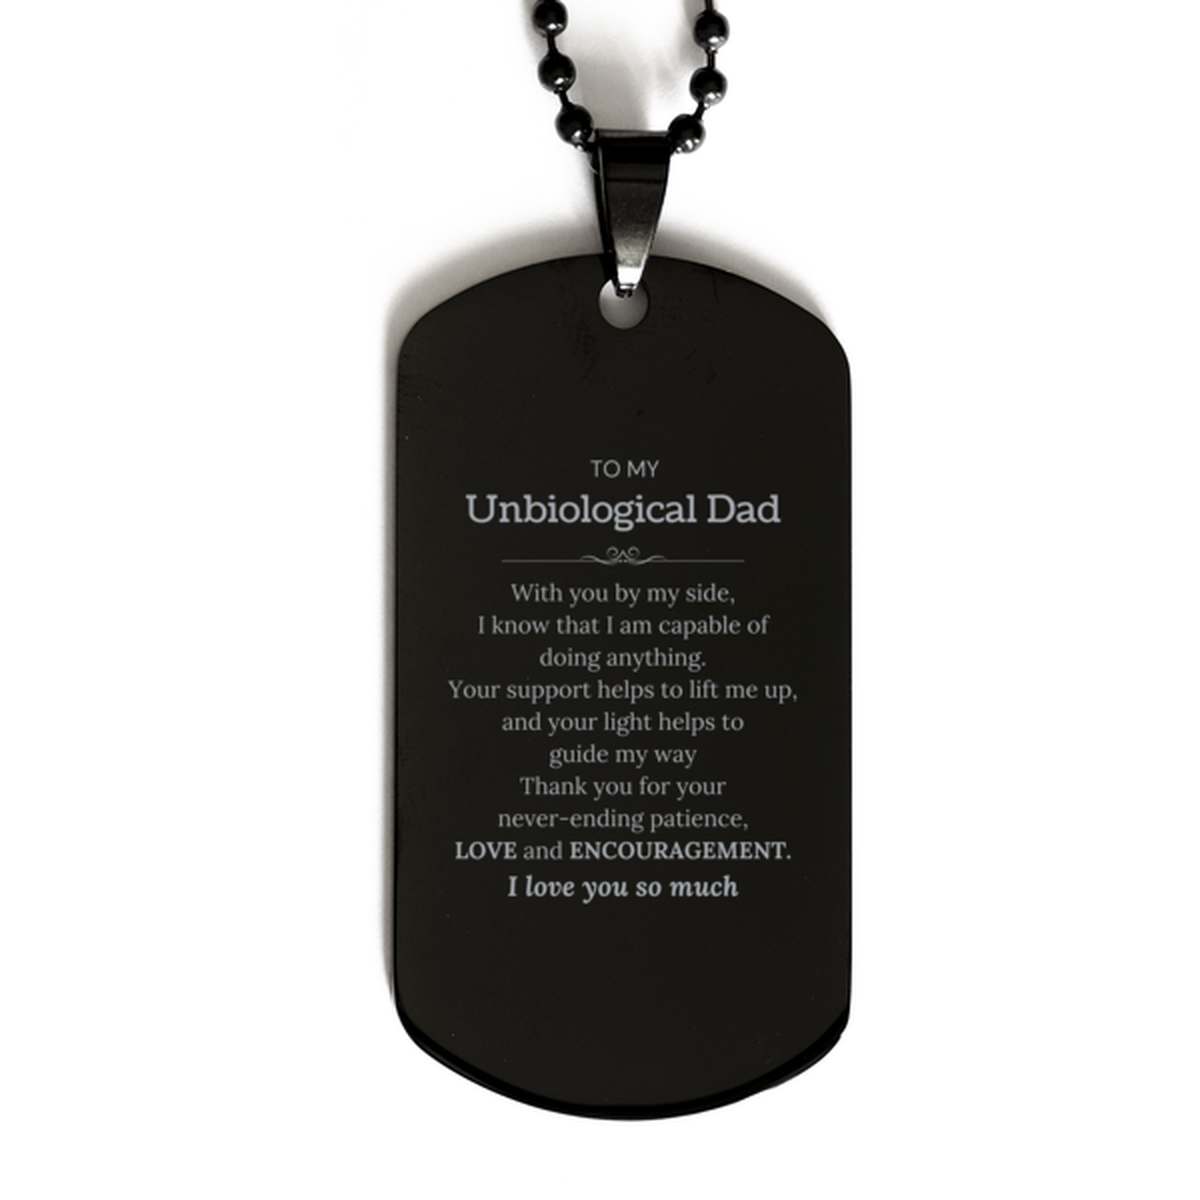 Appreciation Unbiological Dad Black Dog Tag Gifts, To My Unbiological Dad Birthday Christmas Wedding Keepsake Gifts for Unbiological Dad With you by my side, I know that I am capable of doing anything. I love you so much